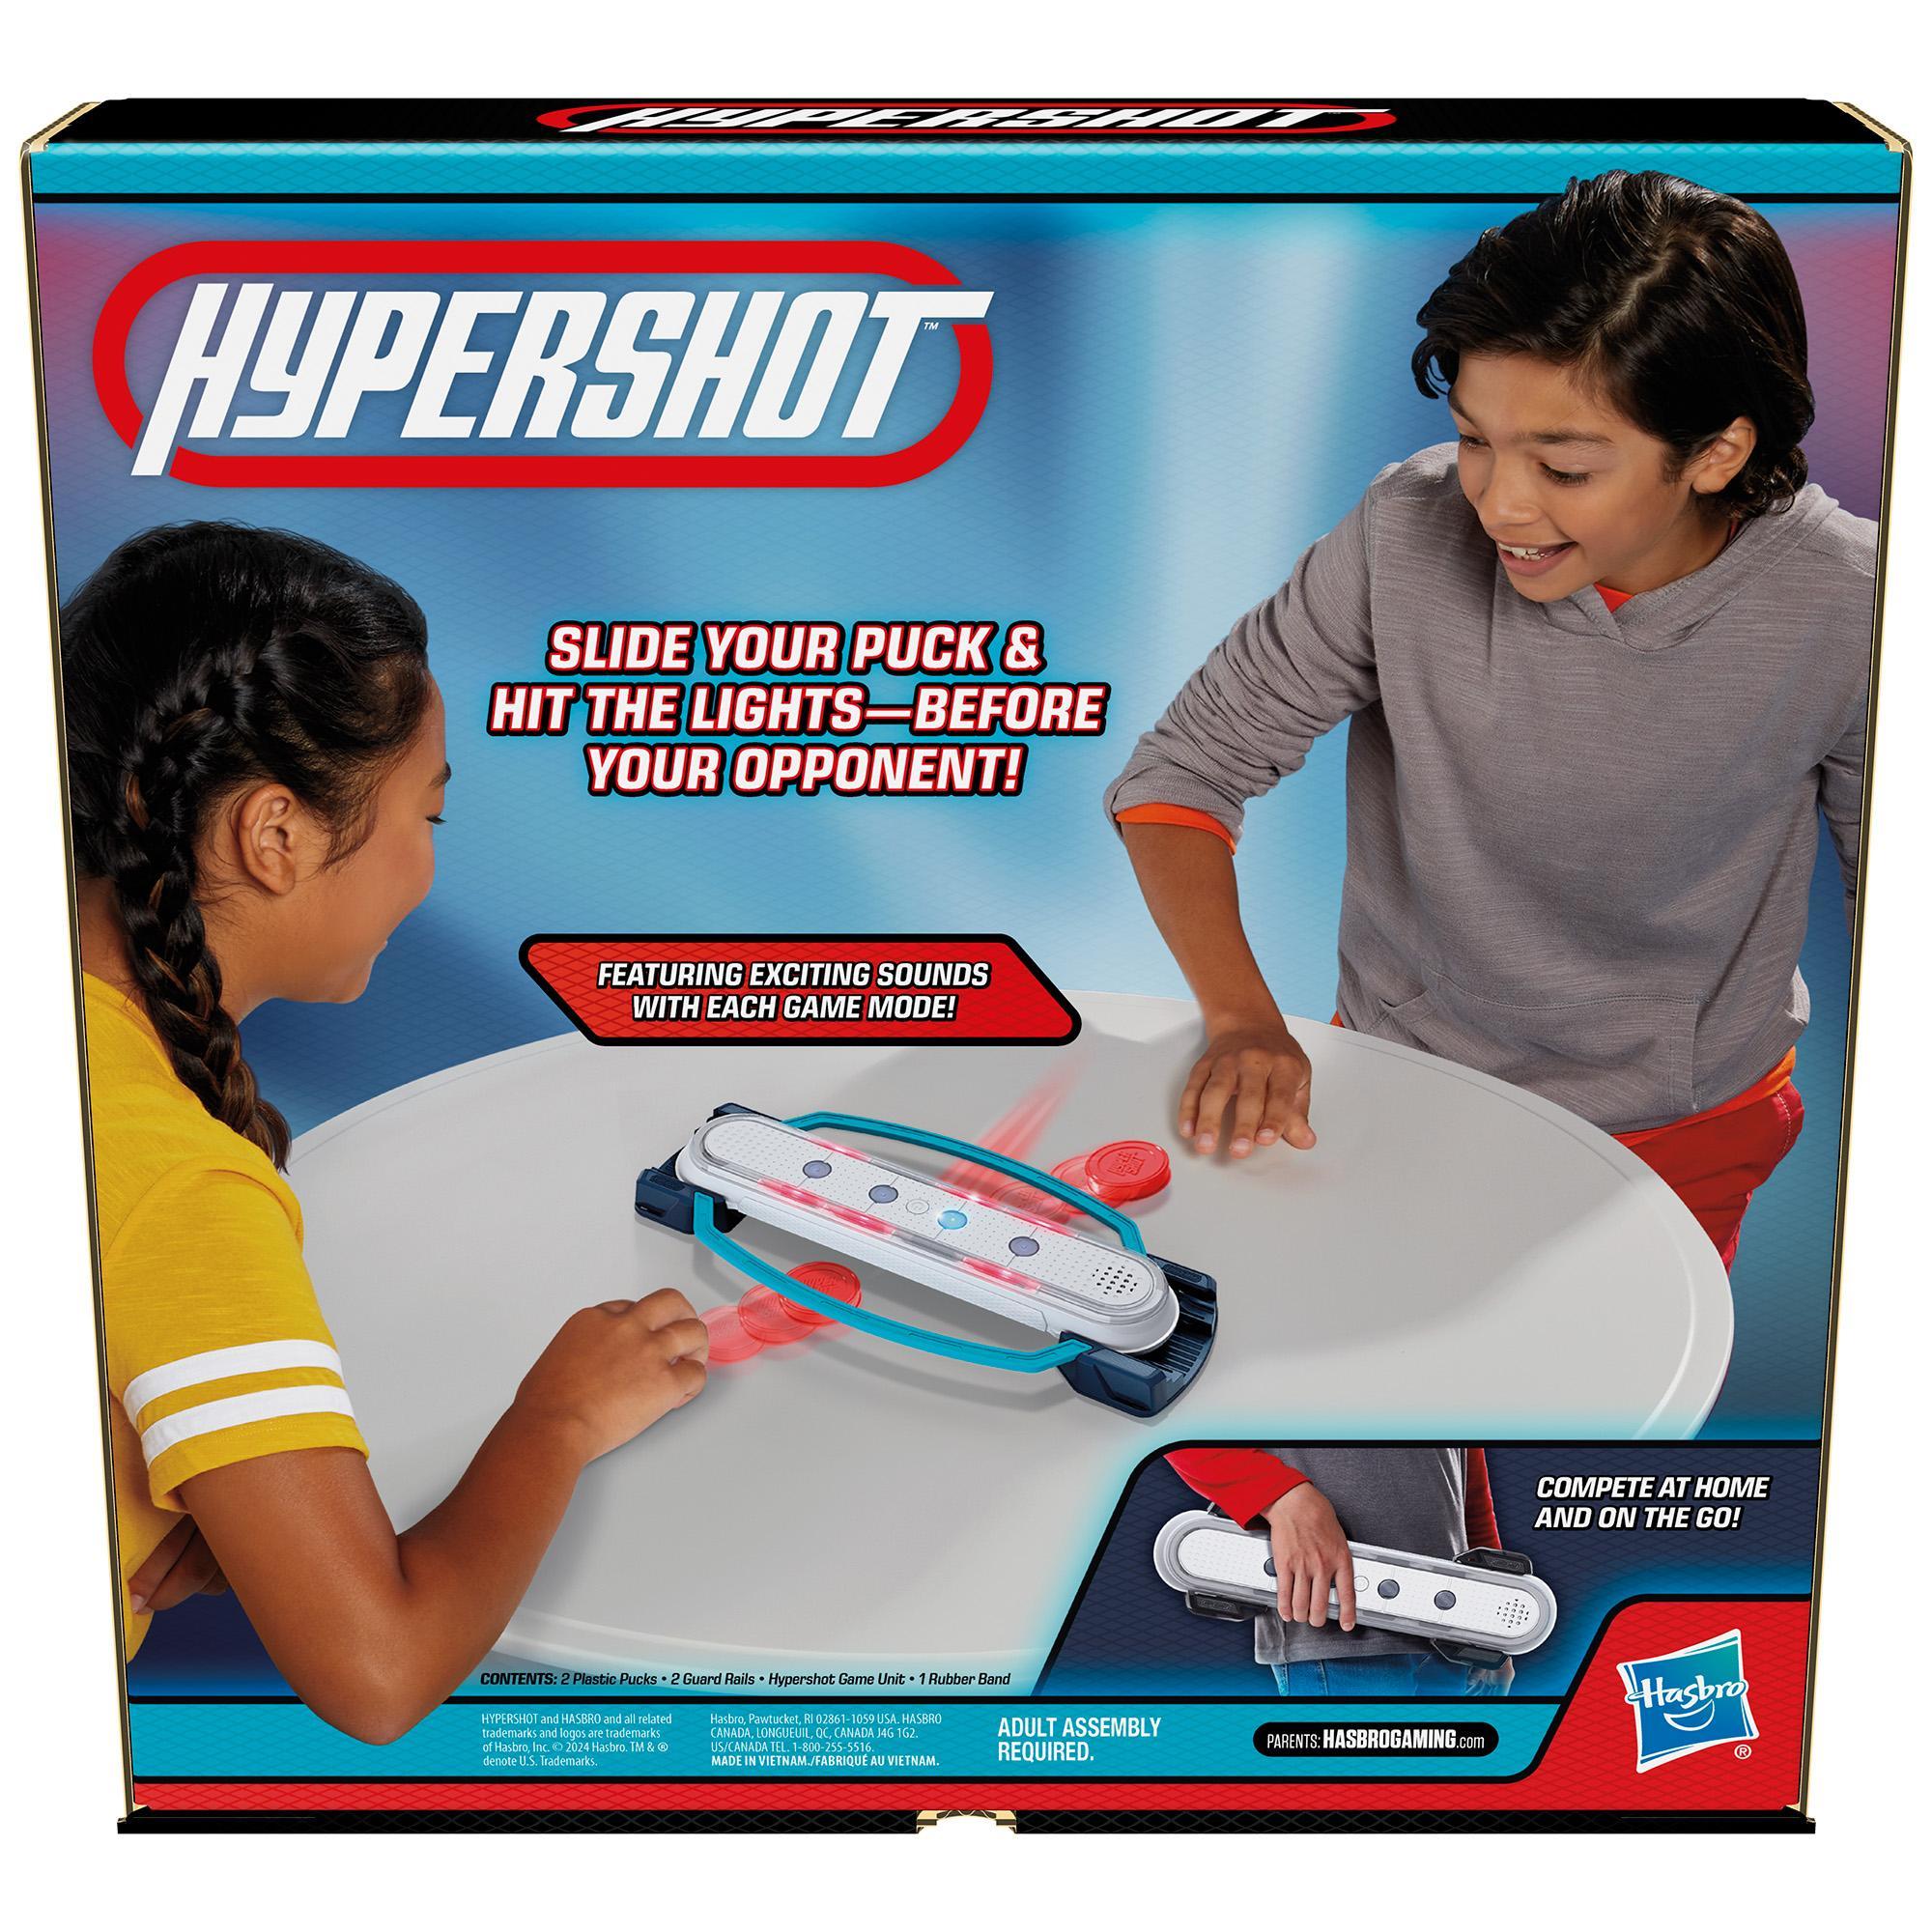 Hypershot Electronic Tabletop Hockey Game, Kids Board Games for 1 to 2 Players, Ages 8+ product thumbnail 1